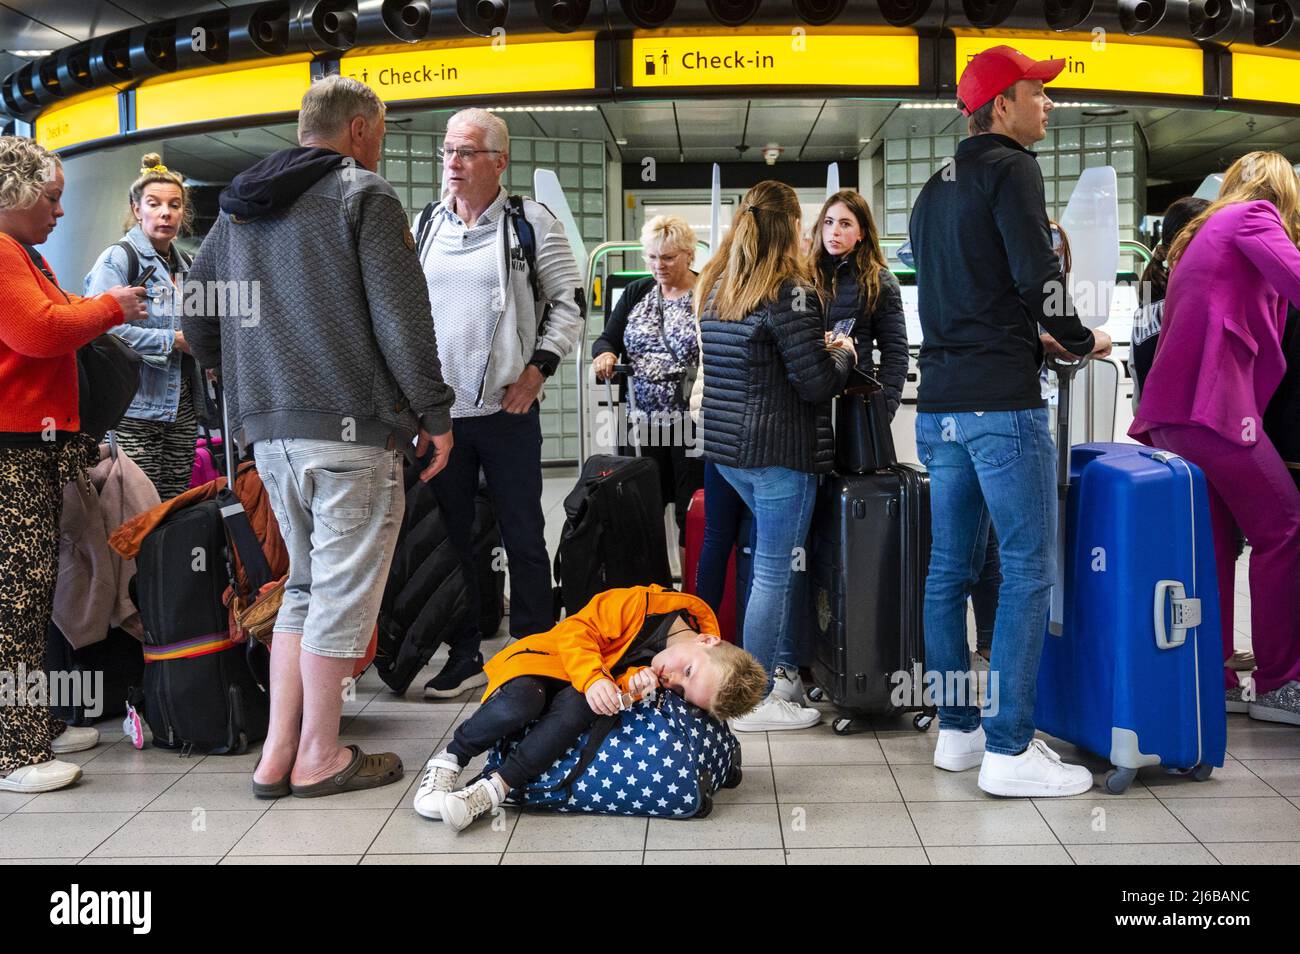 Schiphol, Netherlands. 30th Apr, 2022. 2022-04-30 07:21:59 SCHIPHOL - Schiphol Airport is very busy this weekend. The airport is facing serious staff shortages because there are hundreds of vacancies at the check-in desks, security and in the baggage basement that cannot be filled. ANP EVERT ELZINGA netherlands out - belgium out Credit: ANP/Alamy Live News Stock Photo